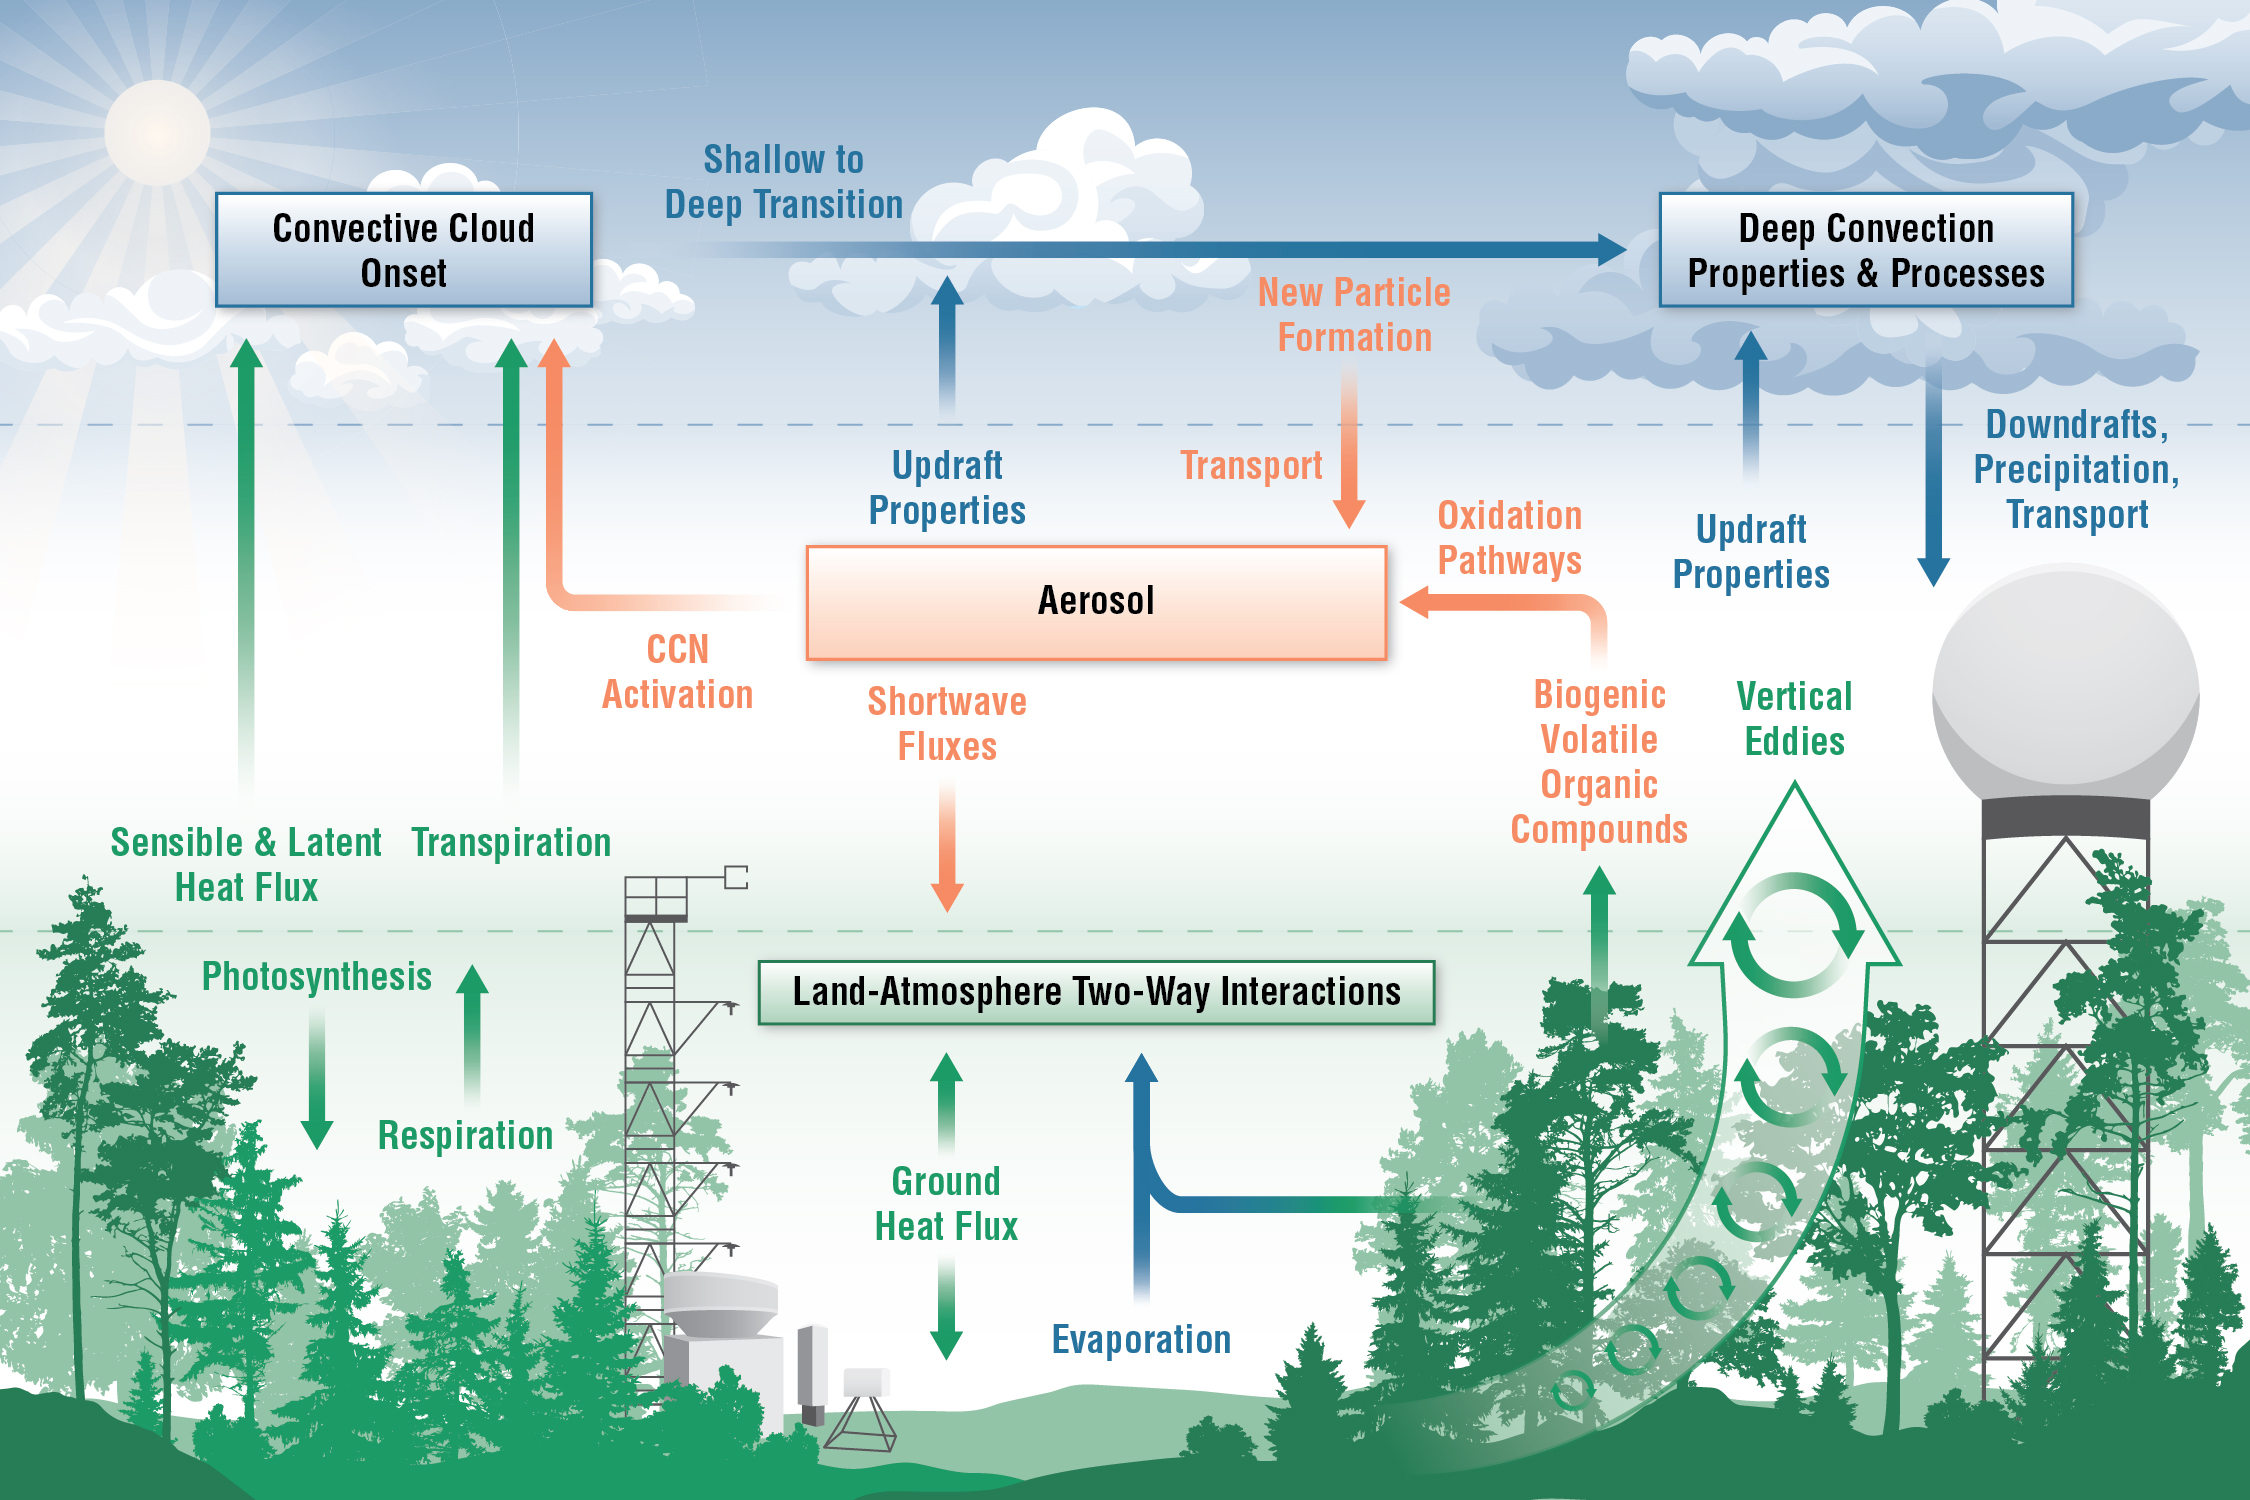 This schematic shows the high-level topical interests of the team overseeing BNF science activities. The three main topical areas are aerosols, convective clouds, and land-atmosphere interactions, with a number of cross-cutting science drivers across the three topics.